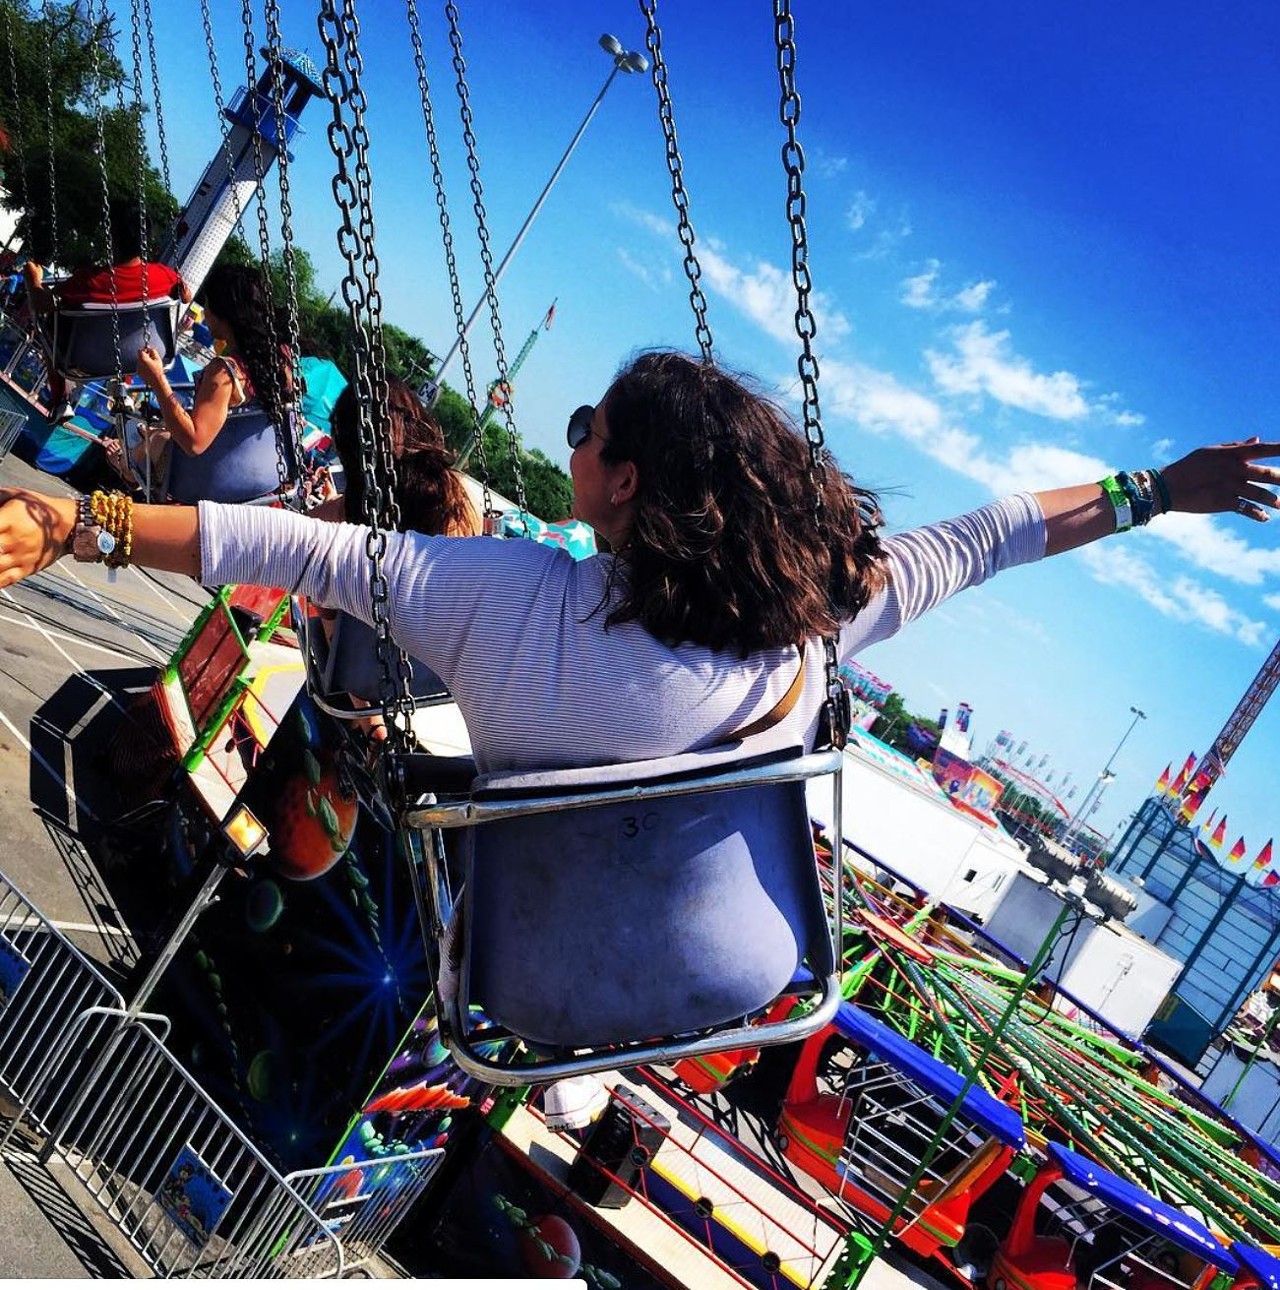 Fiesta Carnival
$22-$25, Thurs. April 18 - Sun. April 28, hours vary, Alamodome parking lot, 401-449 S Cherry St, wadeshows.com
While admission to the carnival itself is free, you’ll be finding yourself paying for rides all night if you don’t get an unlimited rides wristband, which, at $22-$25 (or $18 if you buy before April 17), they’re pretty reasonably priced if you plan to ride until you puke. Which we highly recommend. Plus, this event is hosted by the same company that organizes the Poteet Strawberry Festival, so you know it’s gonna be well done.
Photo via Instagram / sam_pena22